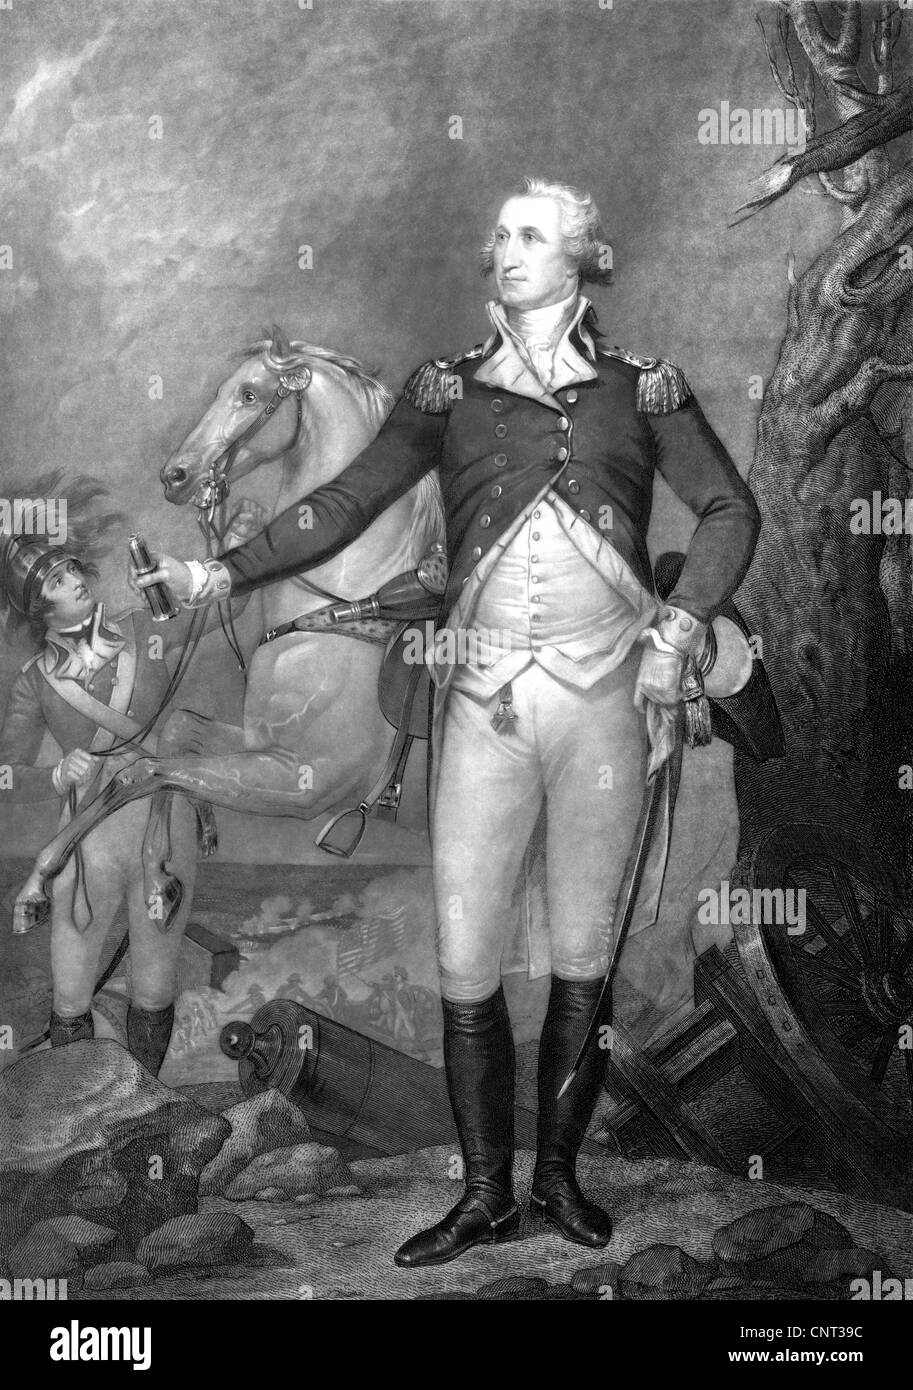 Vintage American History print of General George Washington standing near his horse at The Battle of Trenton. Stock Photo